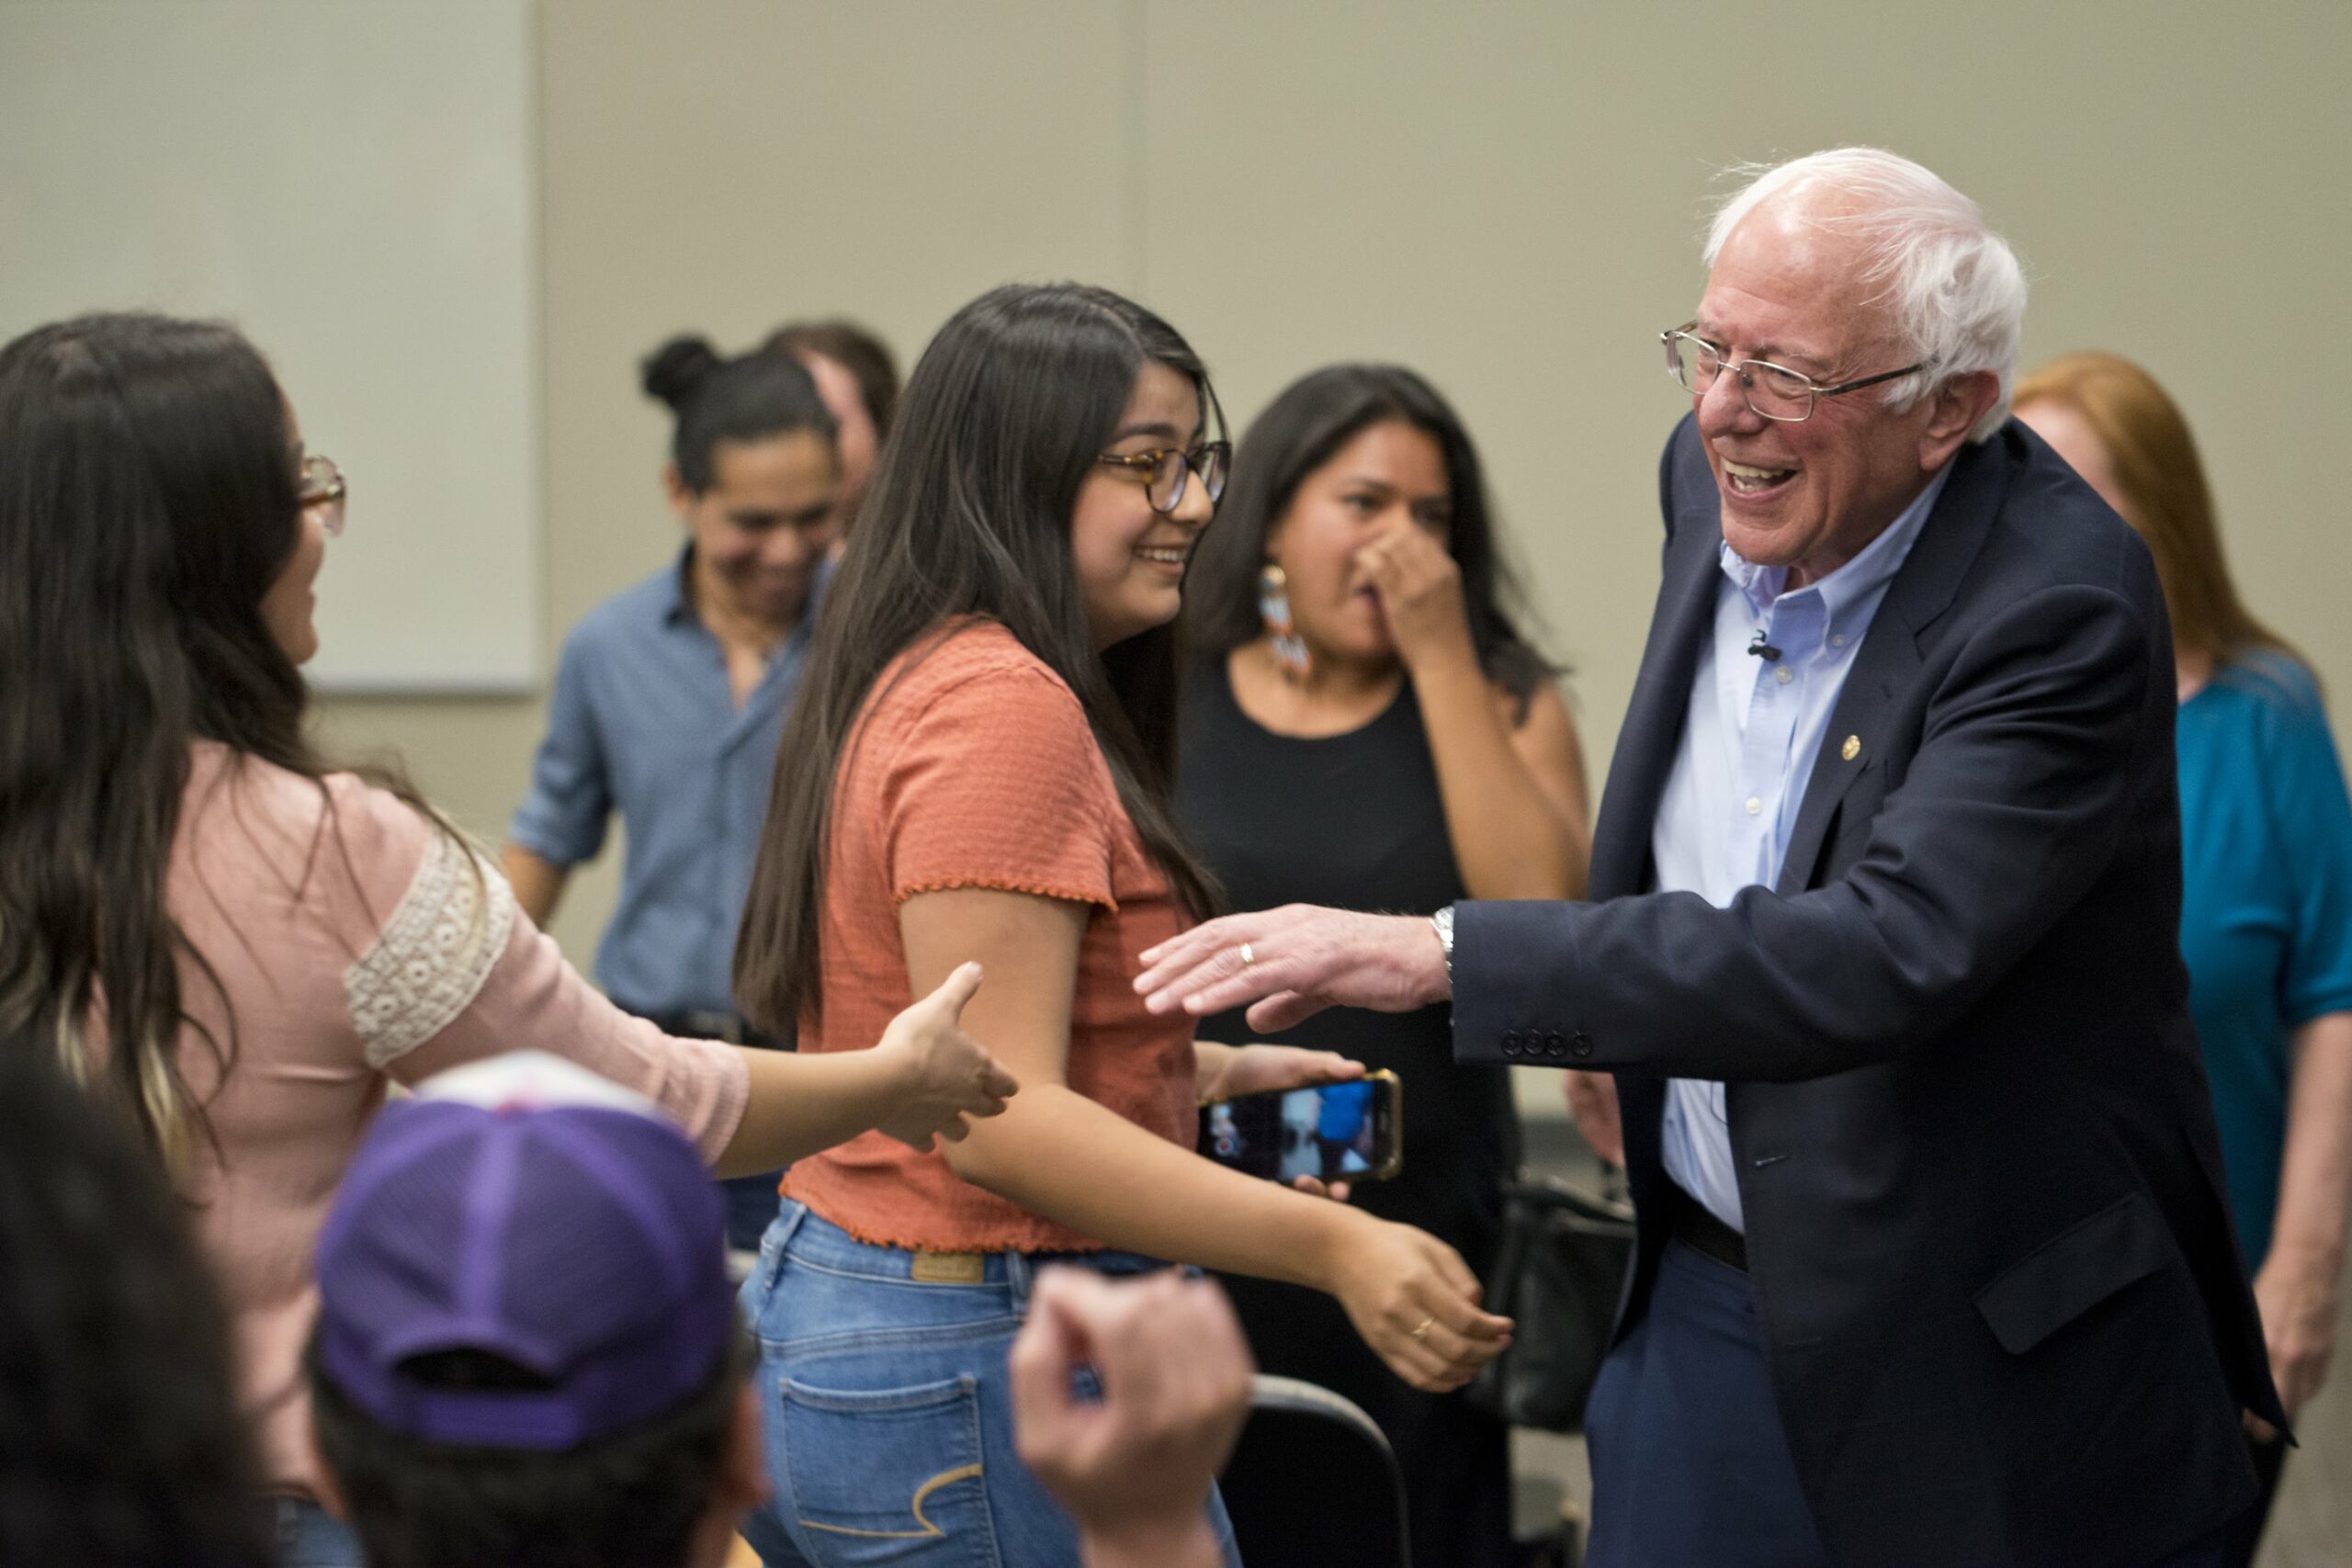 Democratic presidential candidate Sen. Bernie Sanders greets a supporter at a Mijente's El Chisme 2020 event at UNLV in Las Vegas